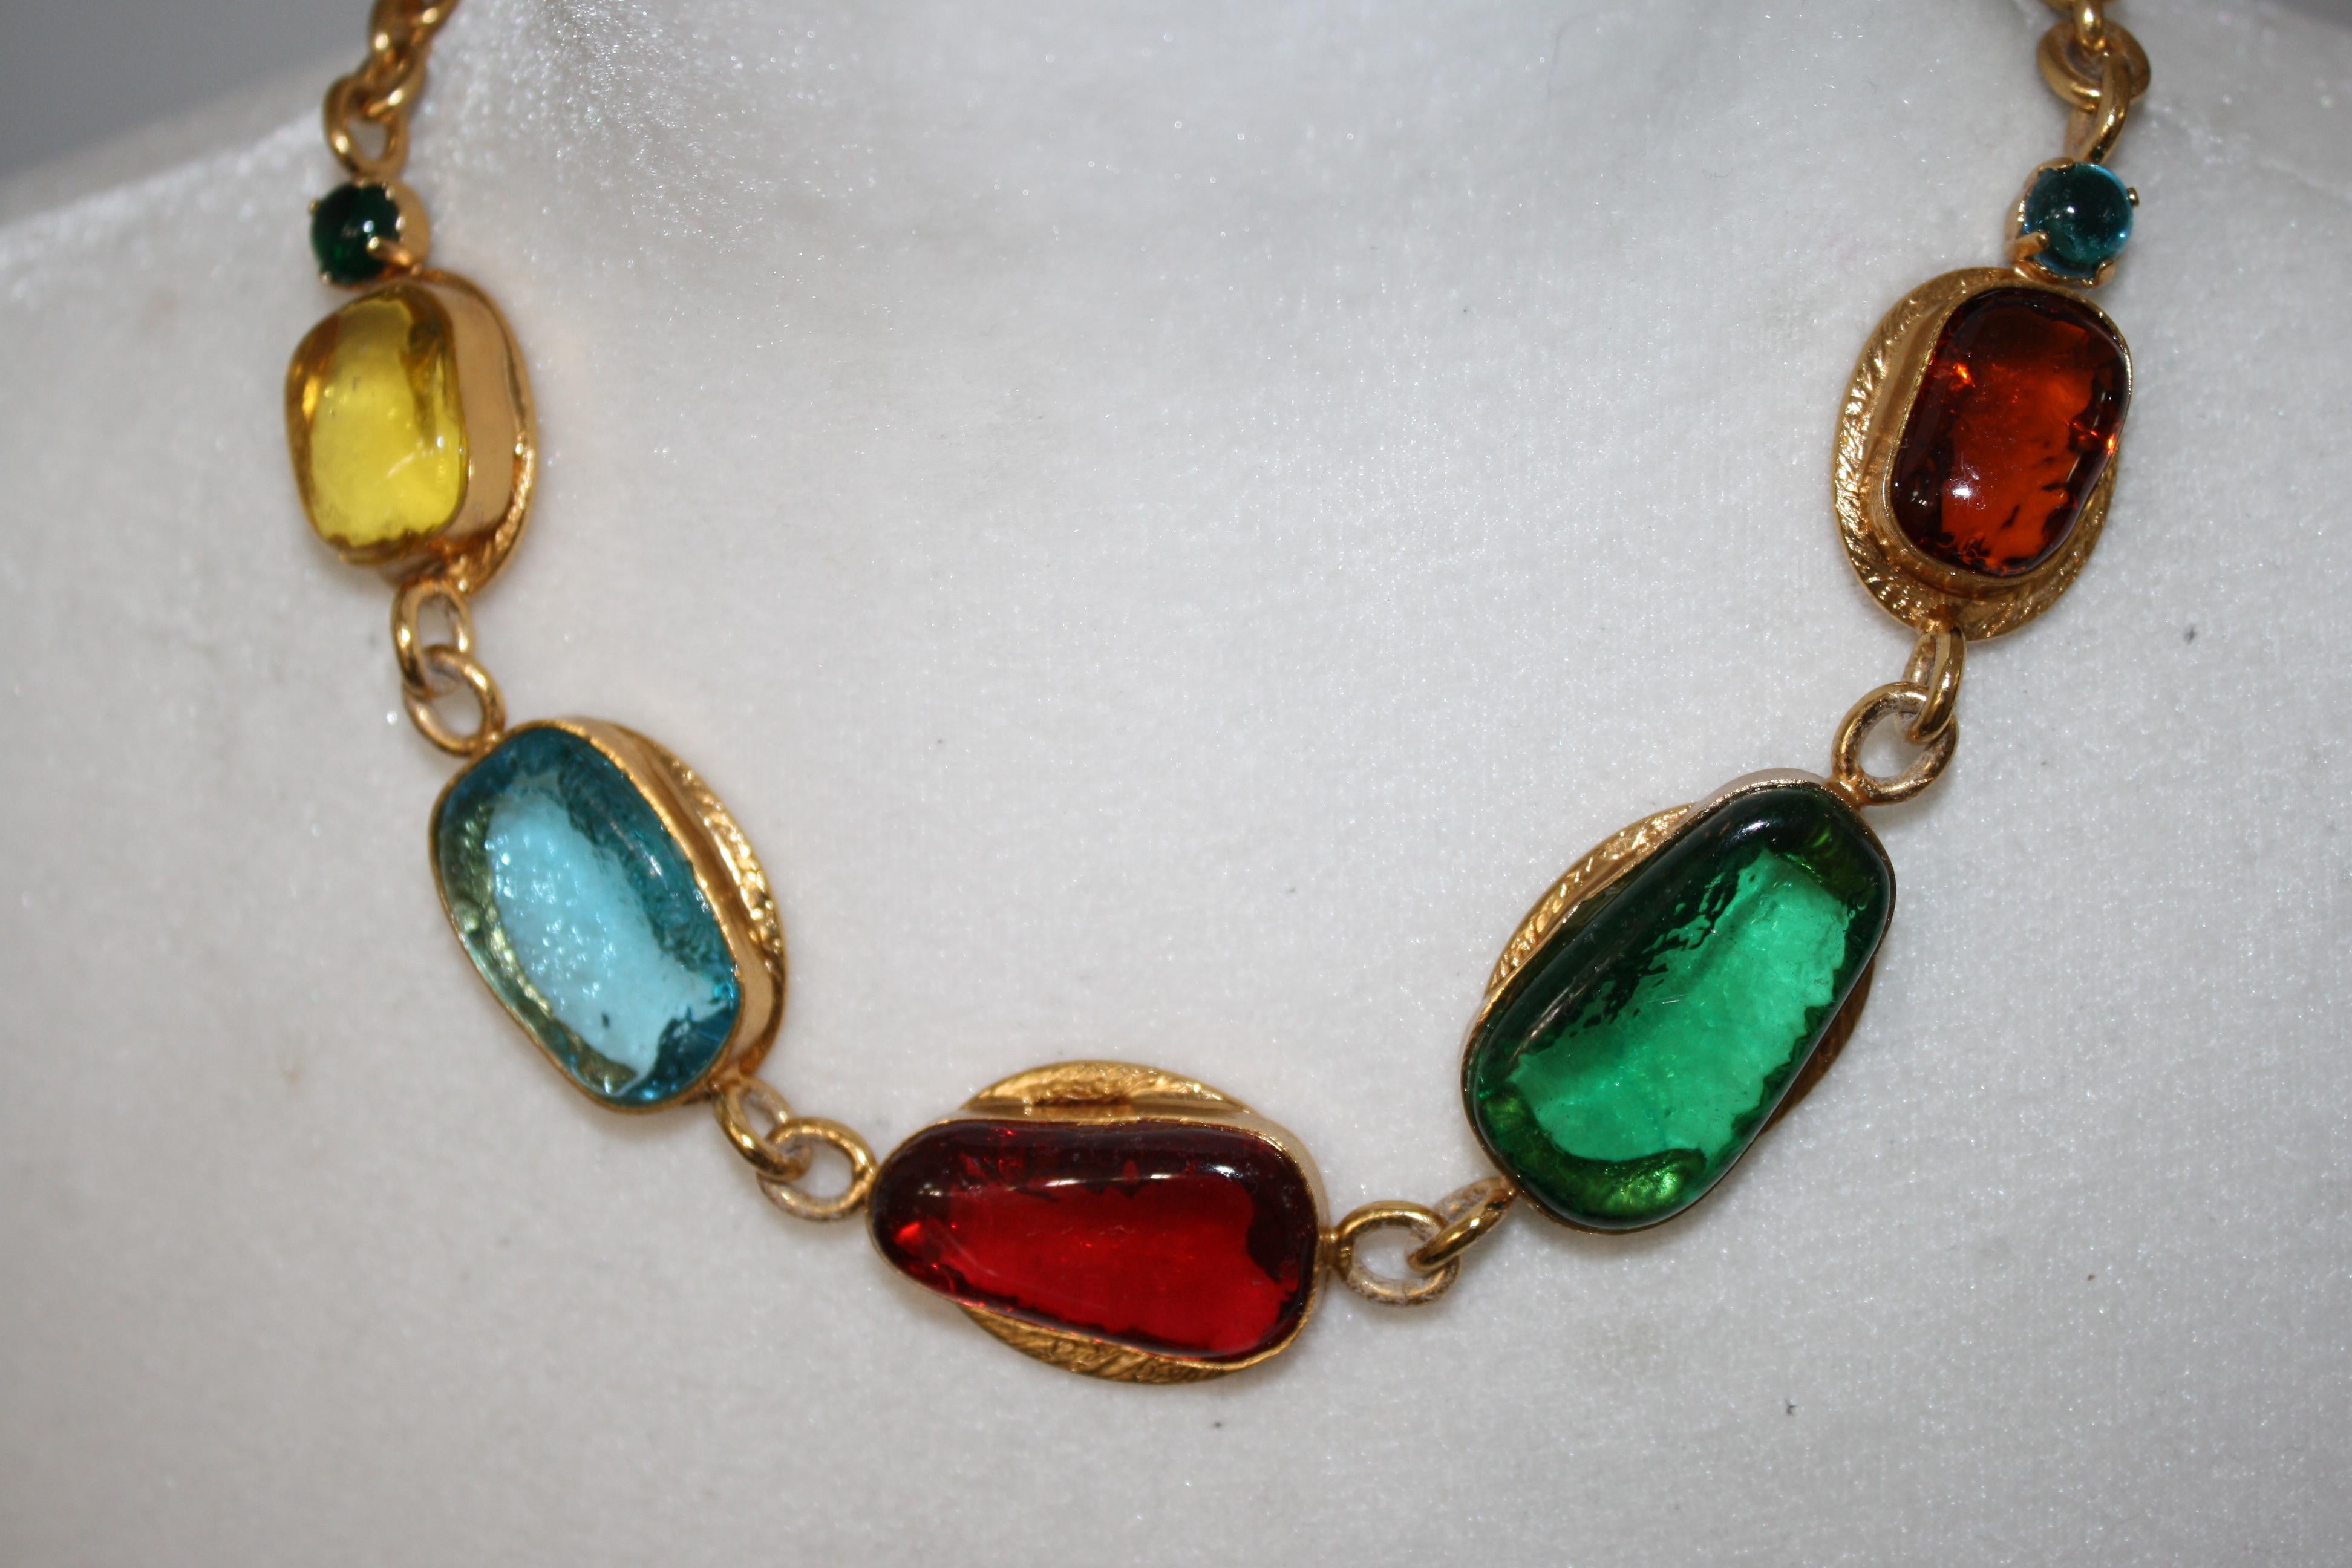 Choker in 24-carat gilded brass metal. Pate de verre or poured glass in the process created by the House of Gripoix.
Vivid colors for the season.